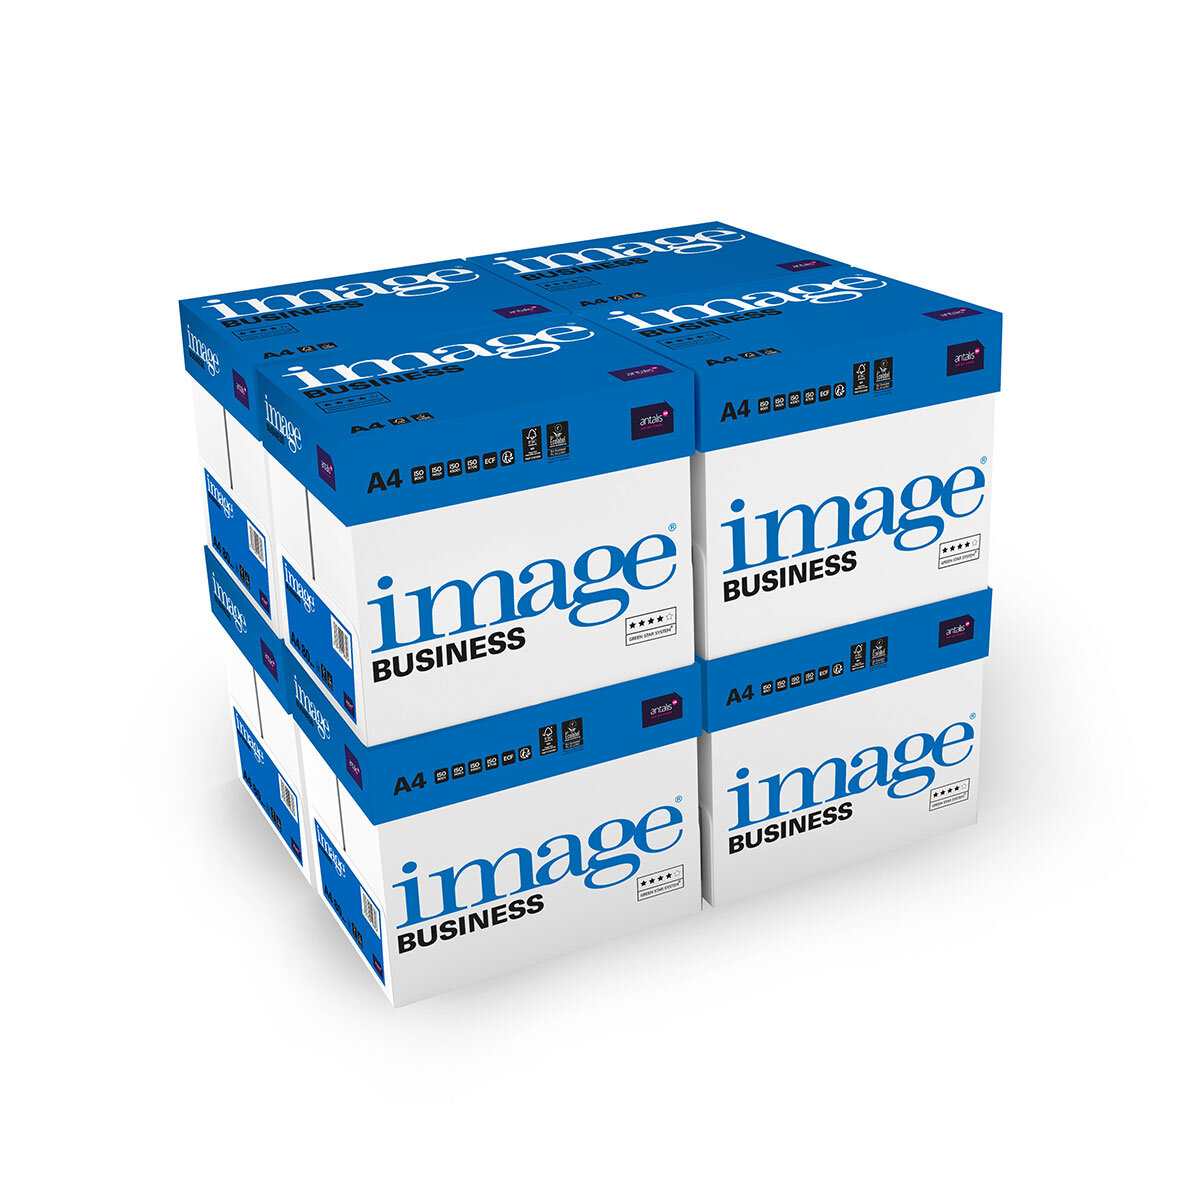 Buy Image Business A4 8 Boxes of Paper Image at Costco.co.uk